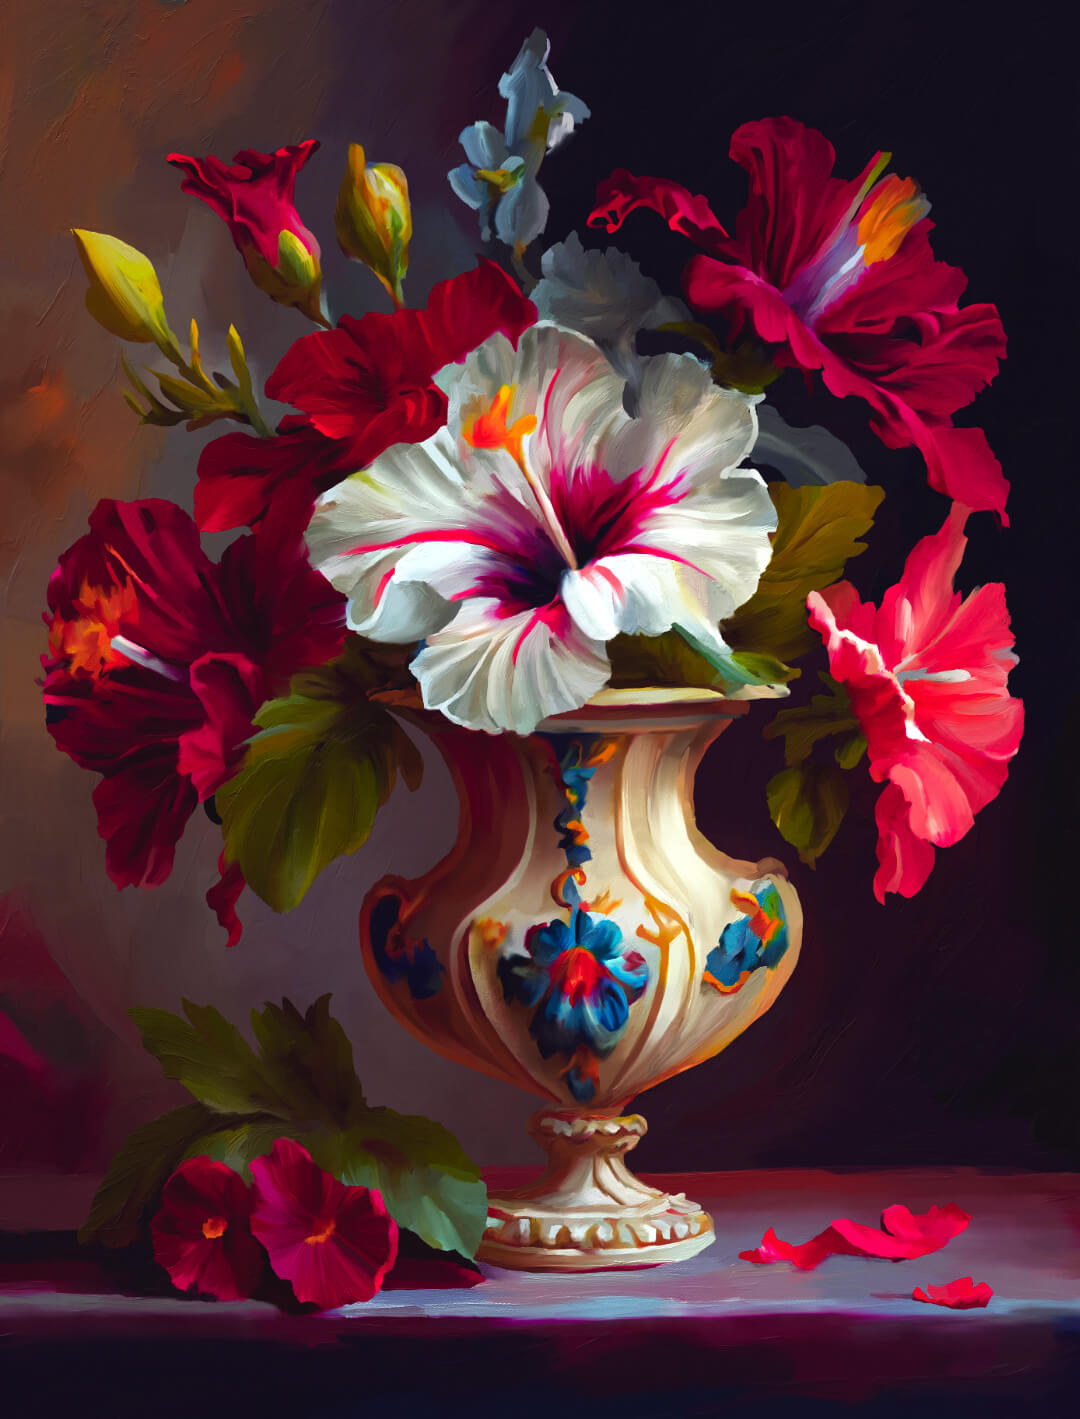 A Baroque-style painting of hibiscus flowers in a fancy vase, sitting on a table.